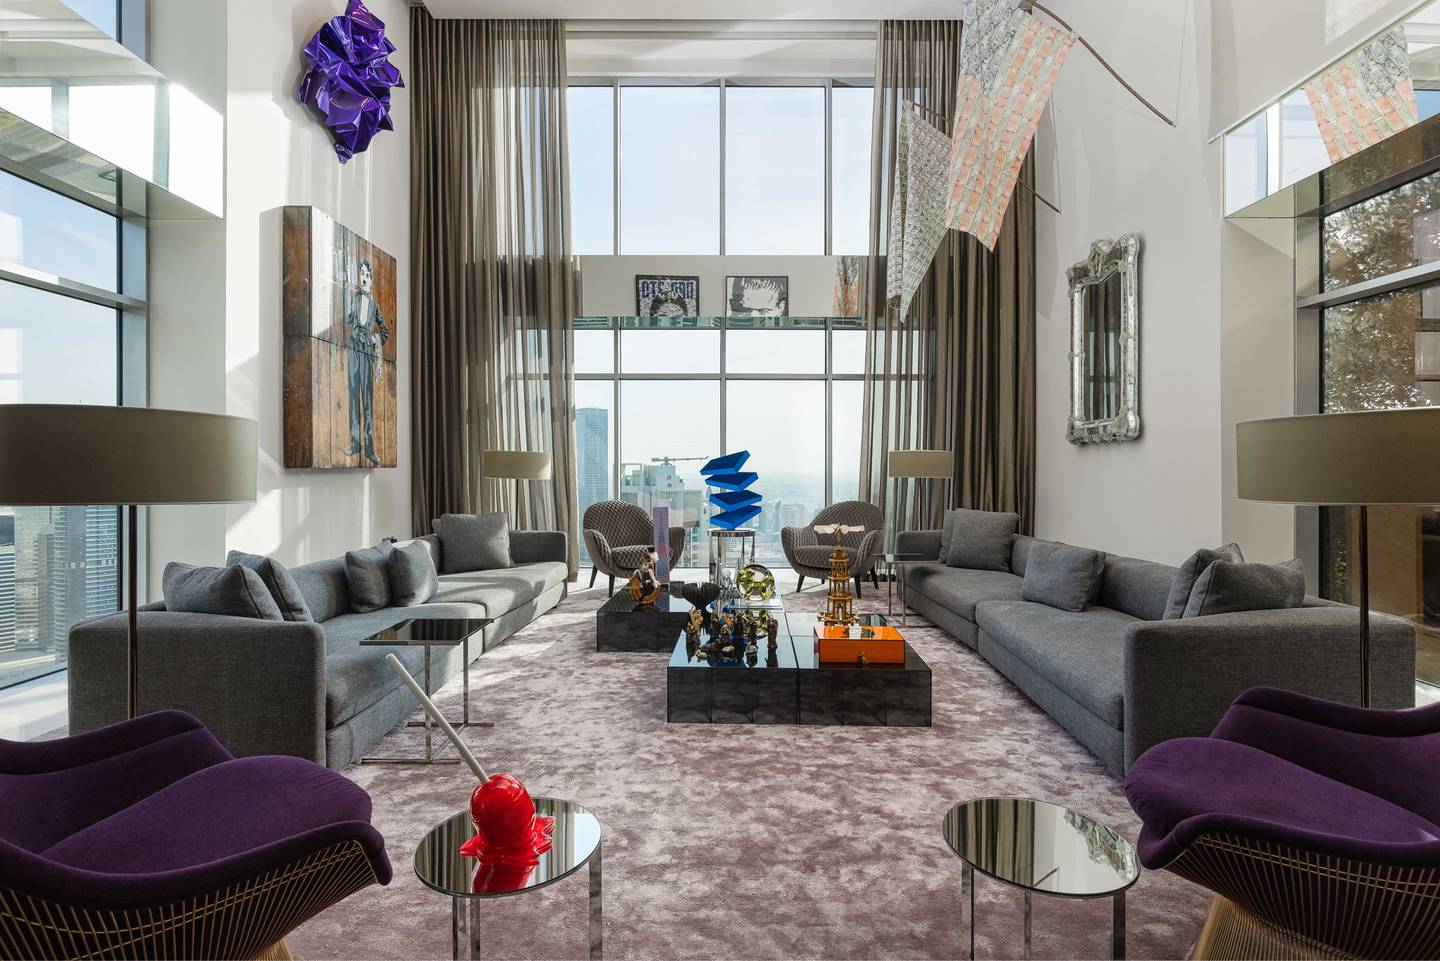 The two-floor property, on sale for Dh37 million, comes with a home cinema, spa and cryotherapy room. Photo: Knight Frank